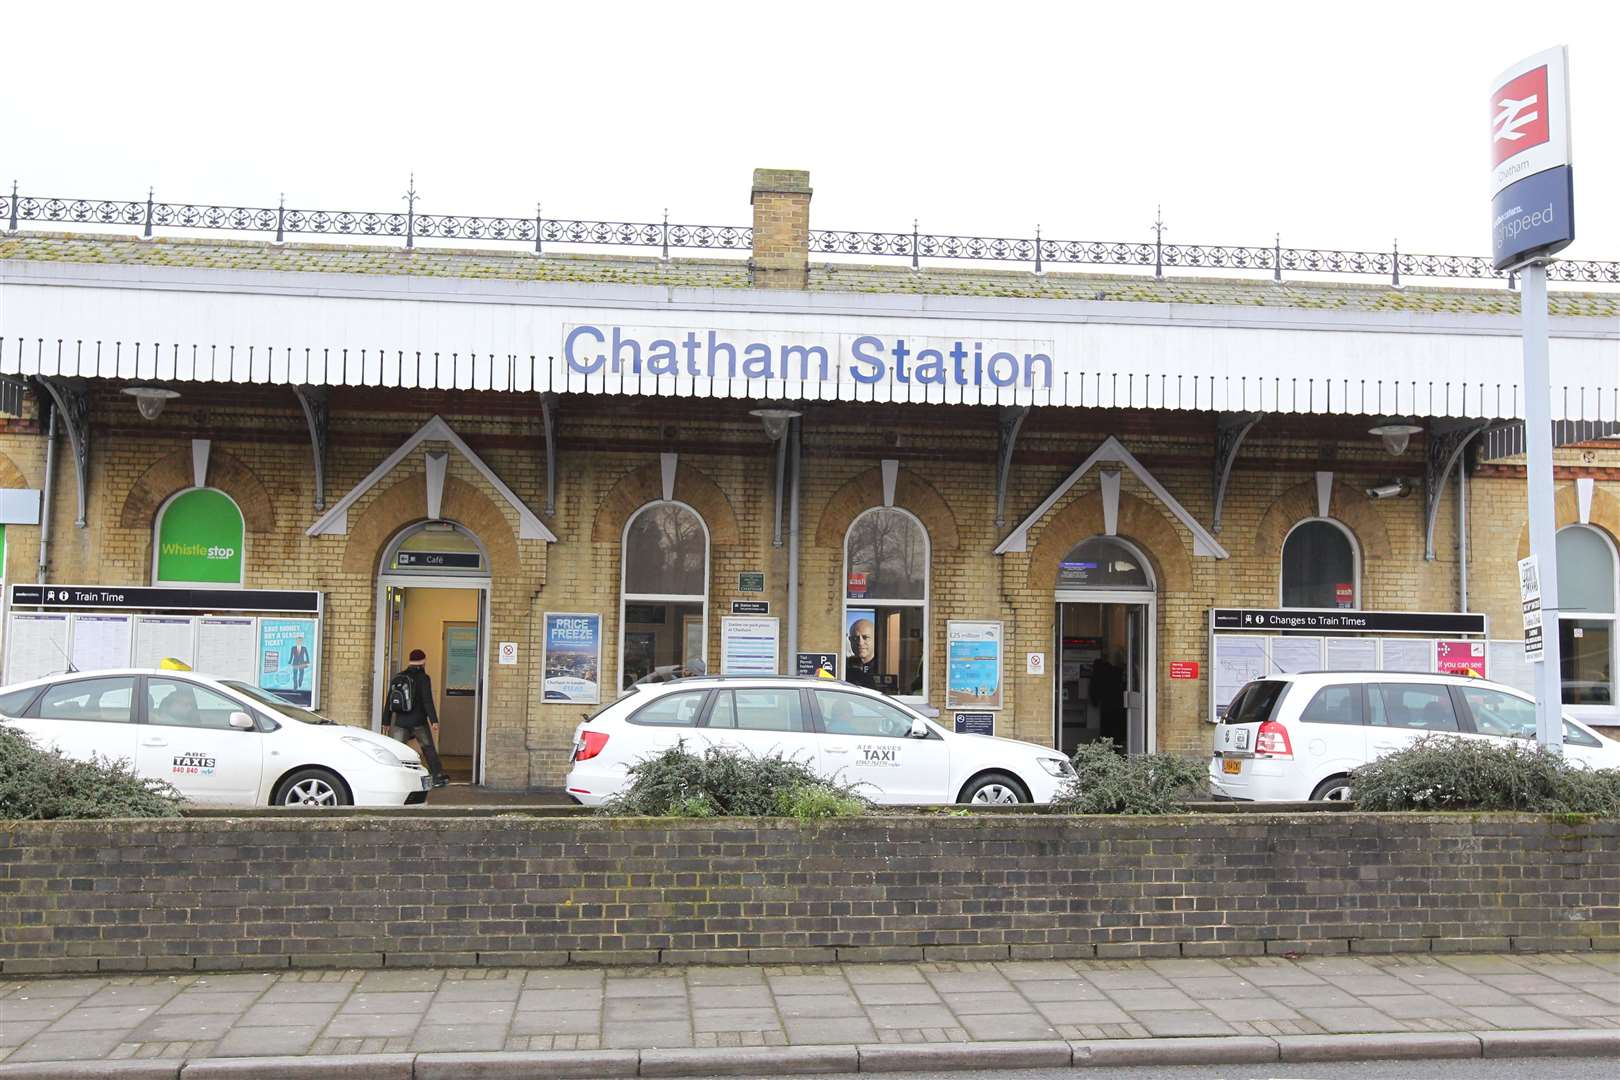 Chatham Railway Station. Picture: John Westhrop